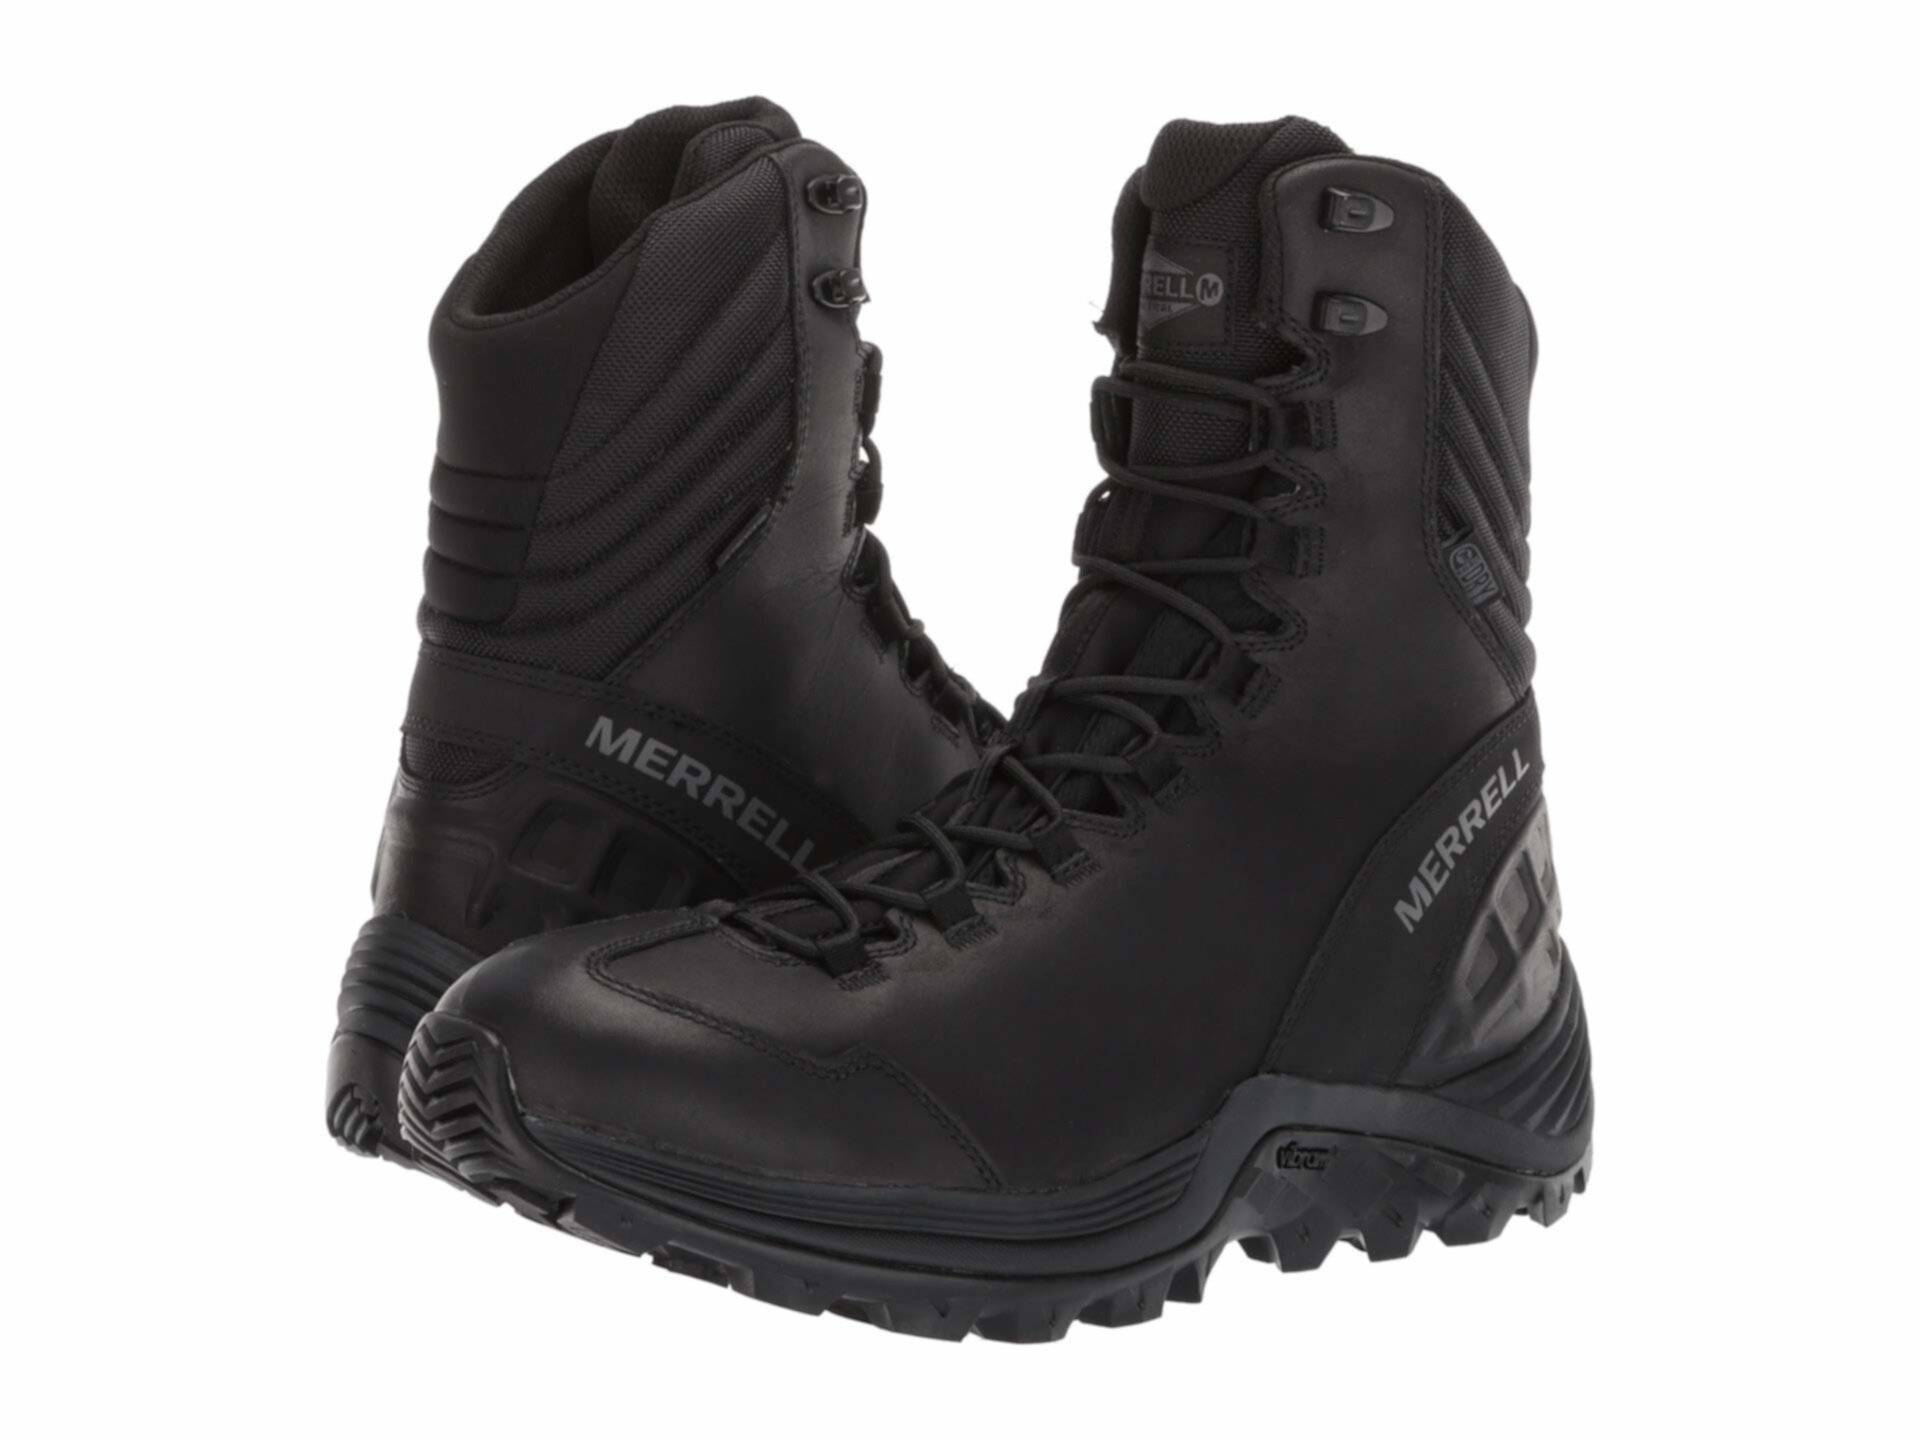 Водонепроницаемая пленка Thermo Rogue Tactical Waterproof Ice + Merrell Work